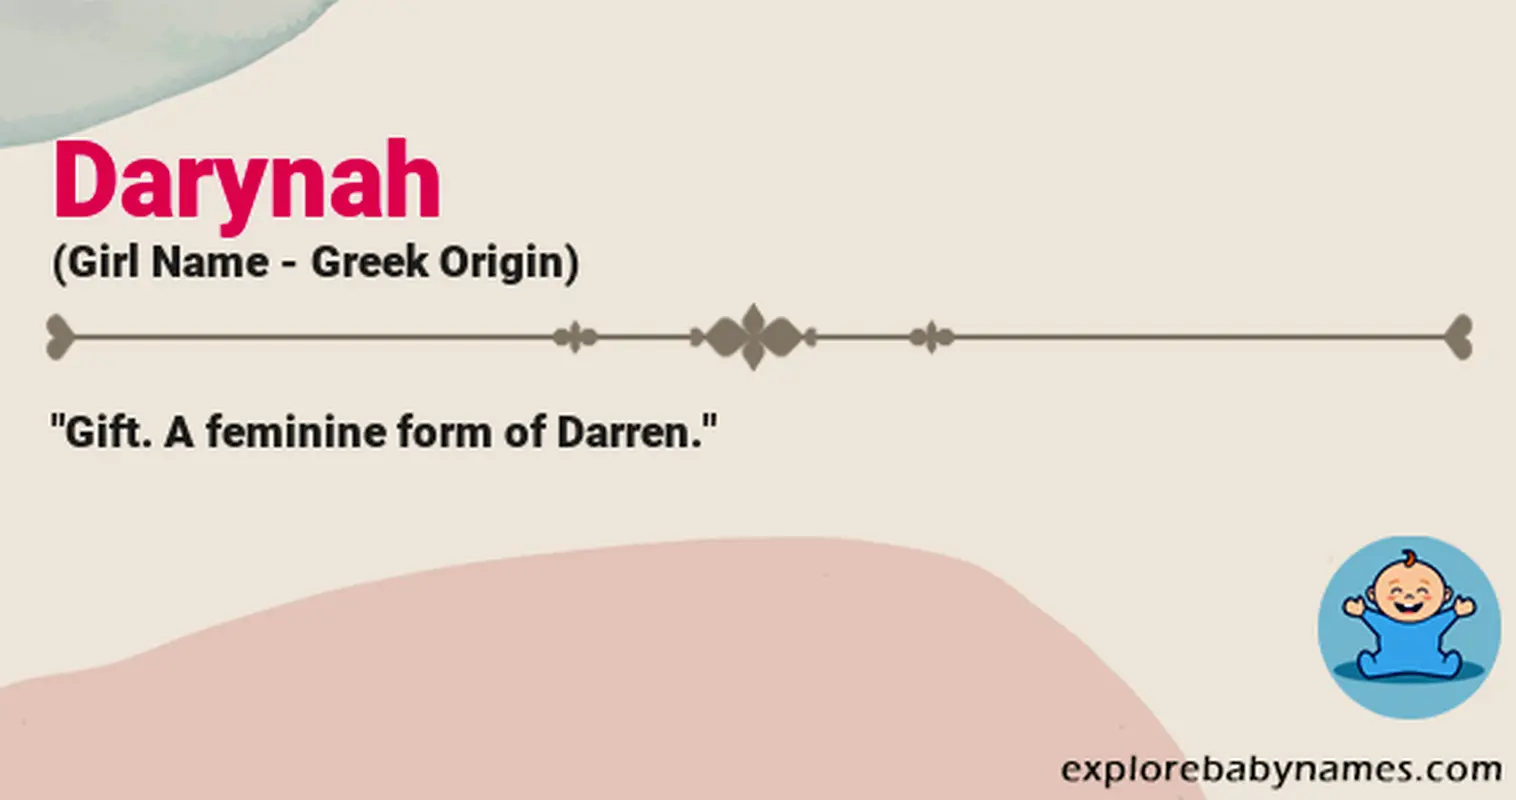 Meaning of Darynah